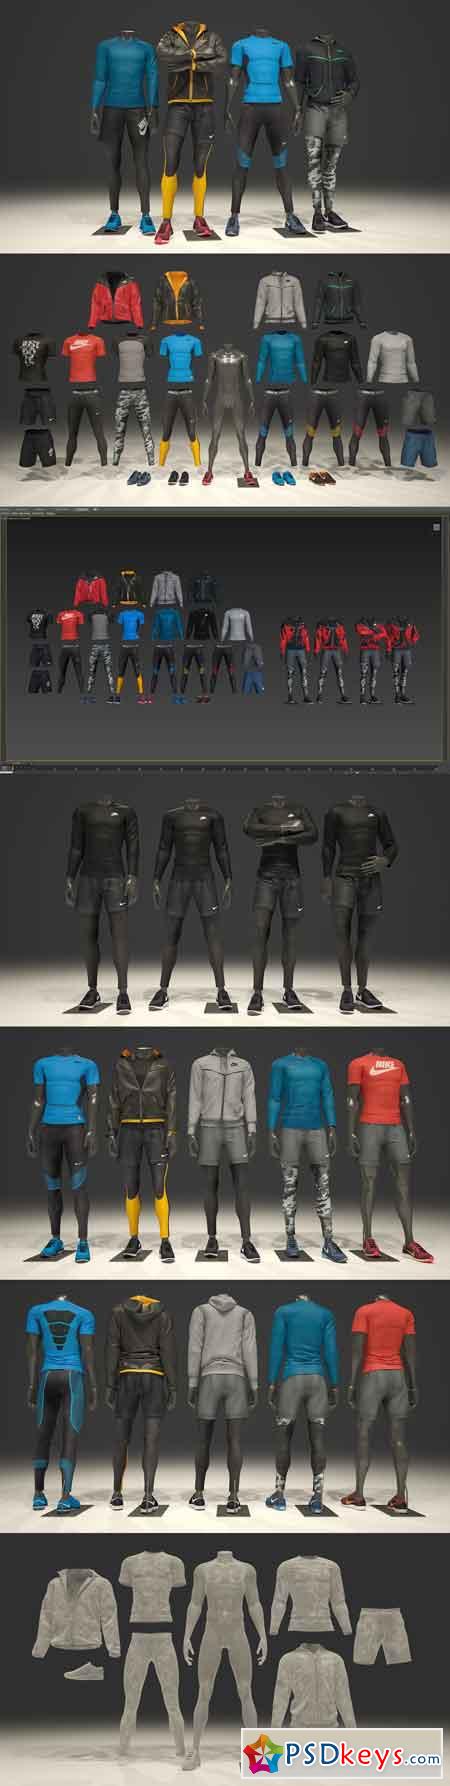 Male Mannequin Nike Pack 1 2123419